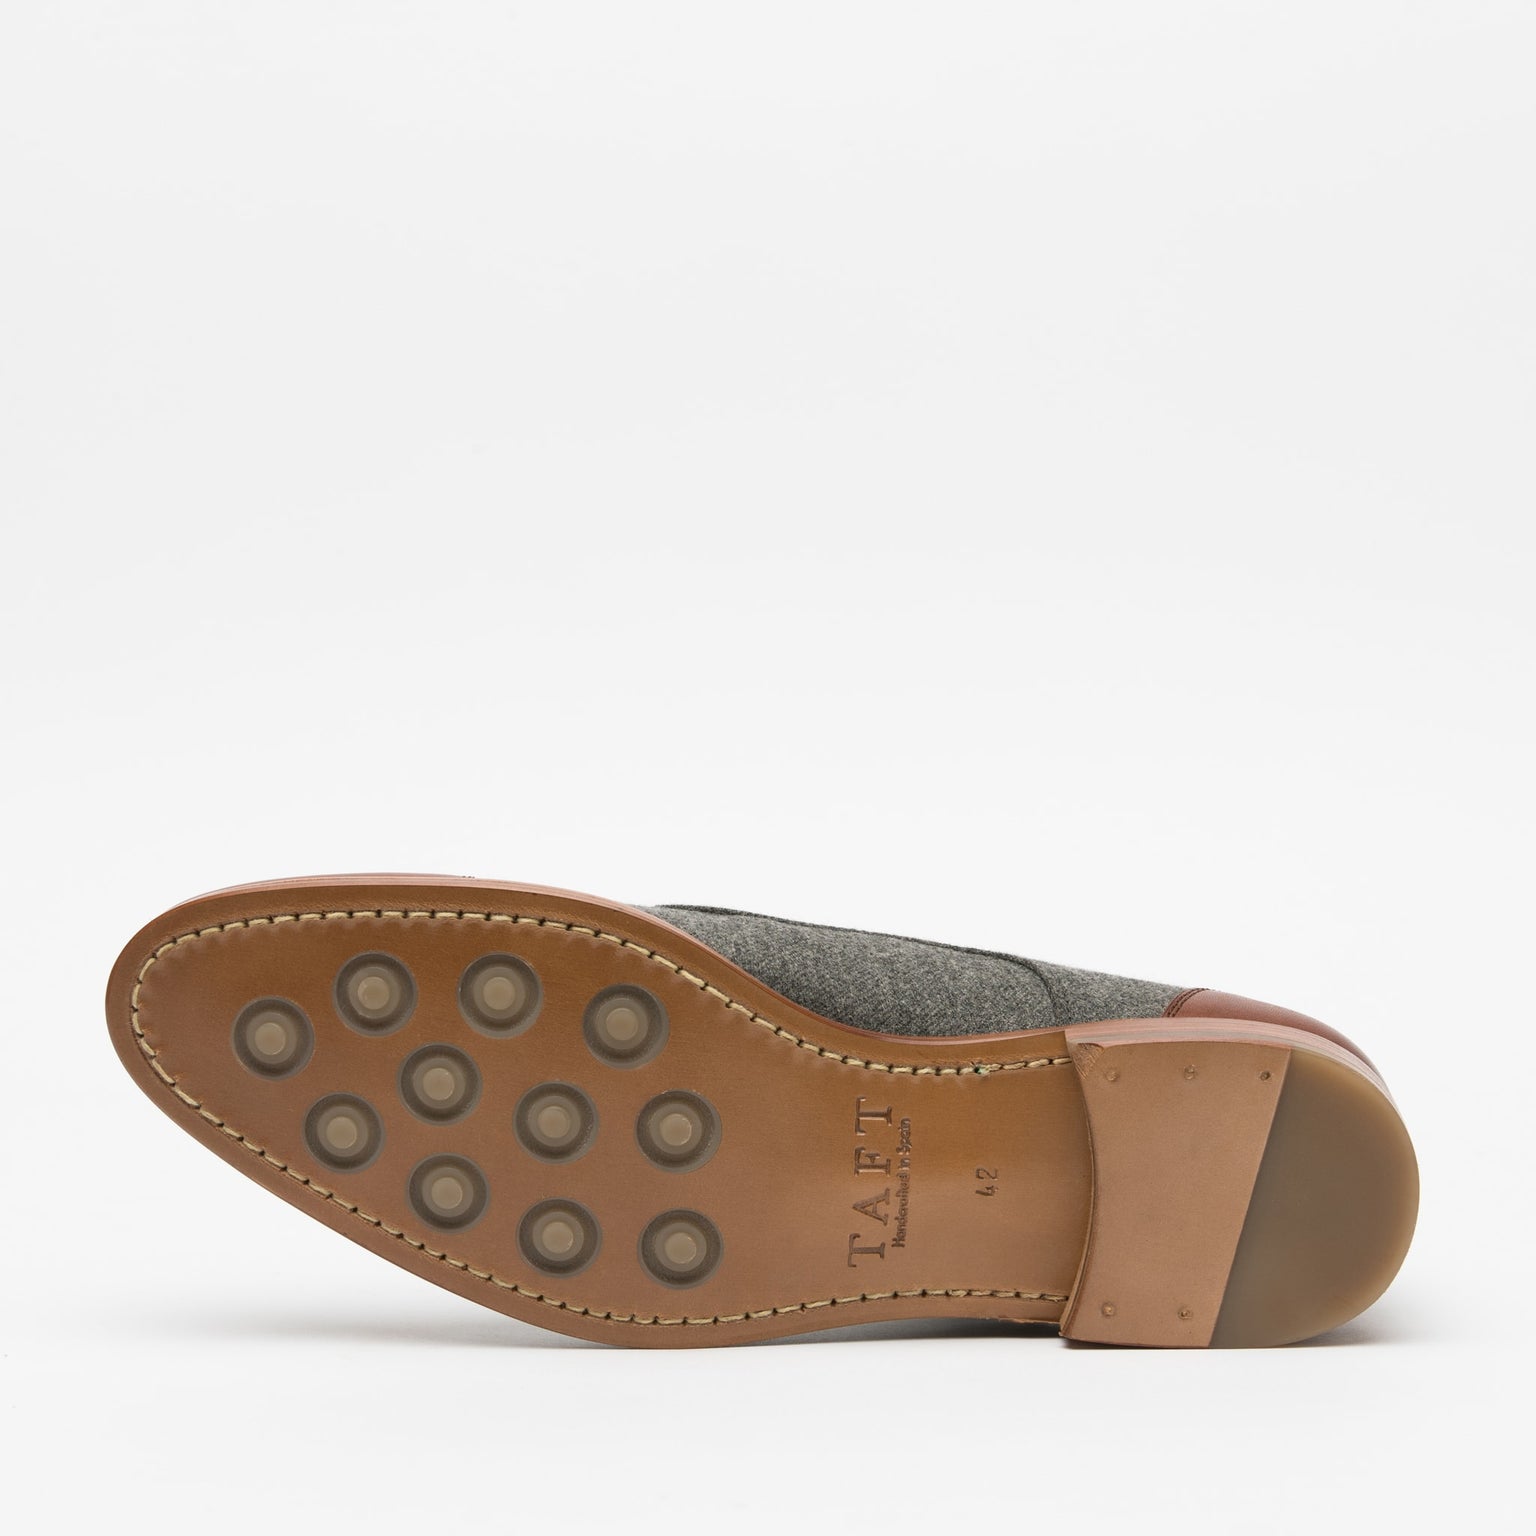 The Jack Shoe - Grey/Brown Leather Shoes | TAFT